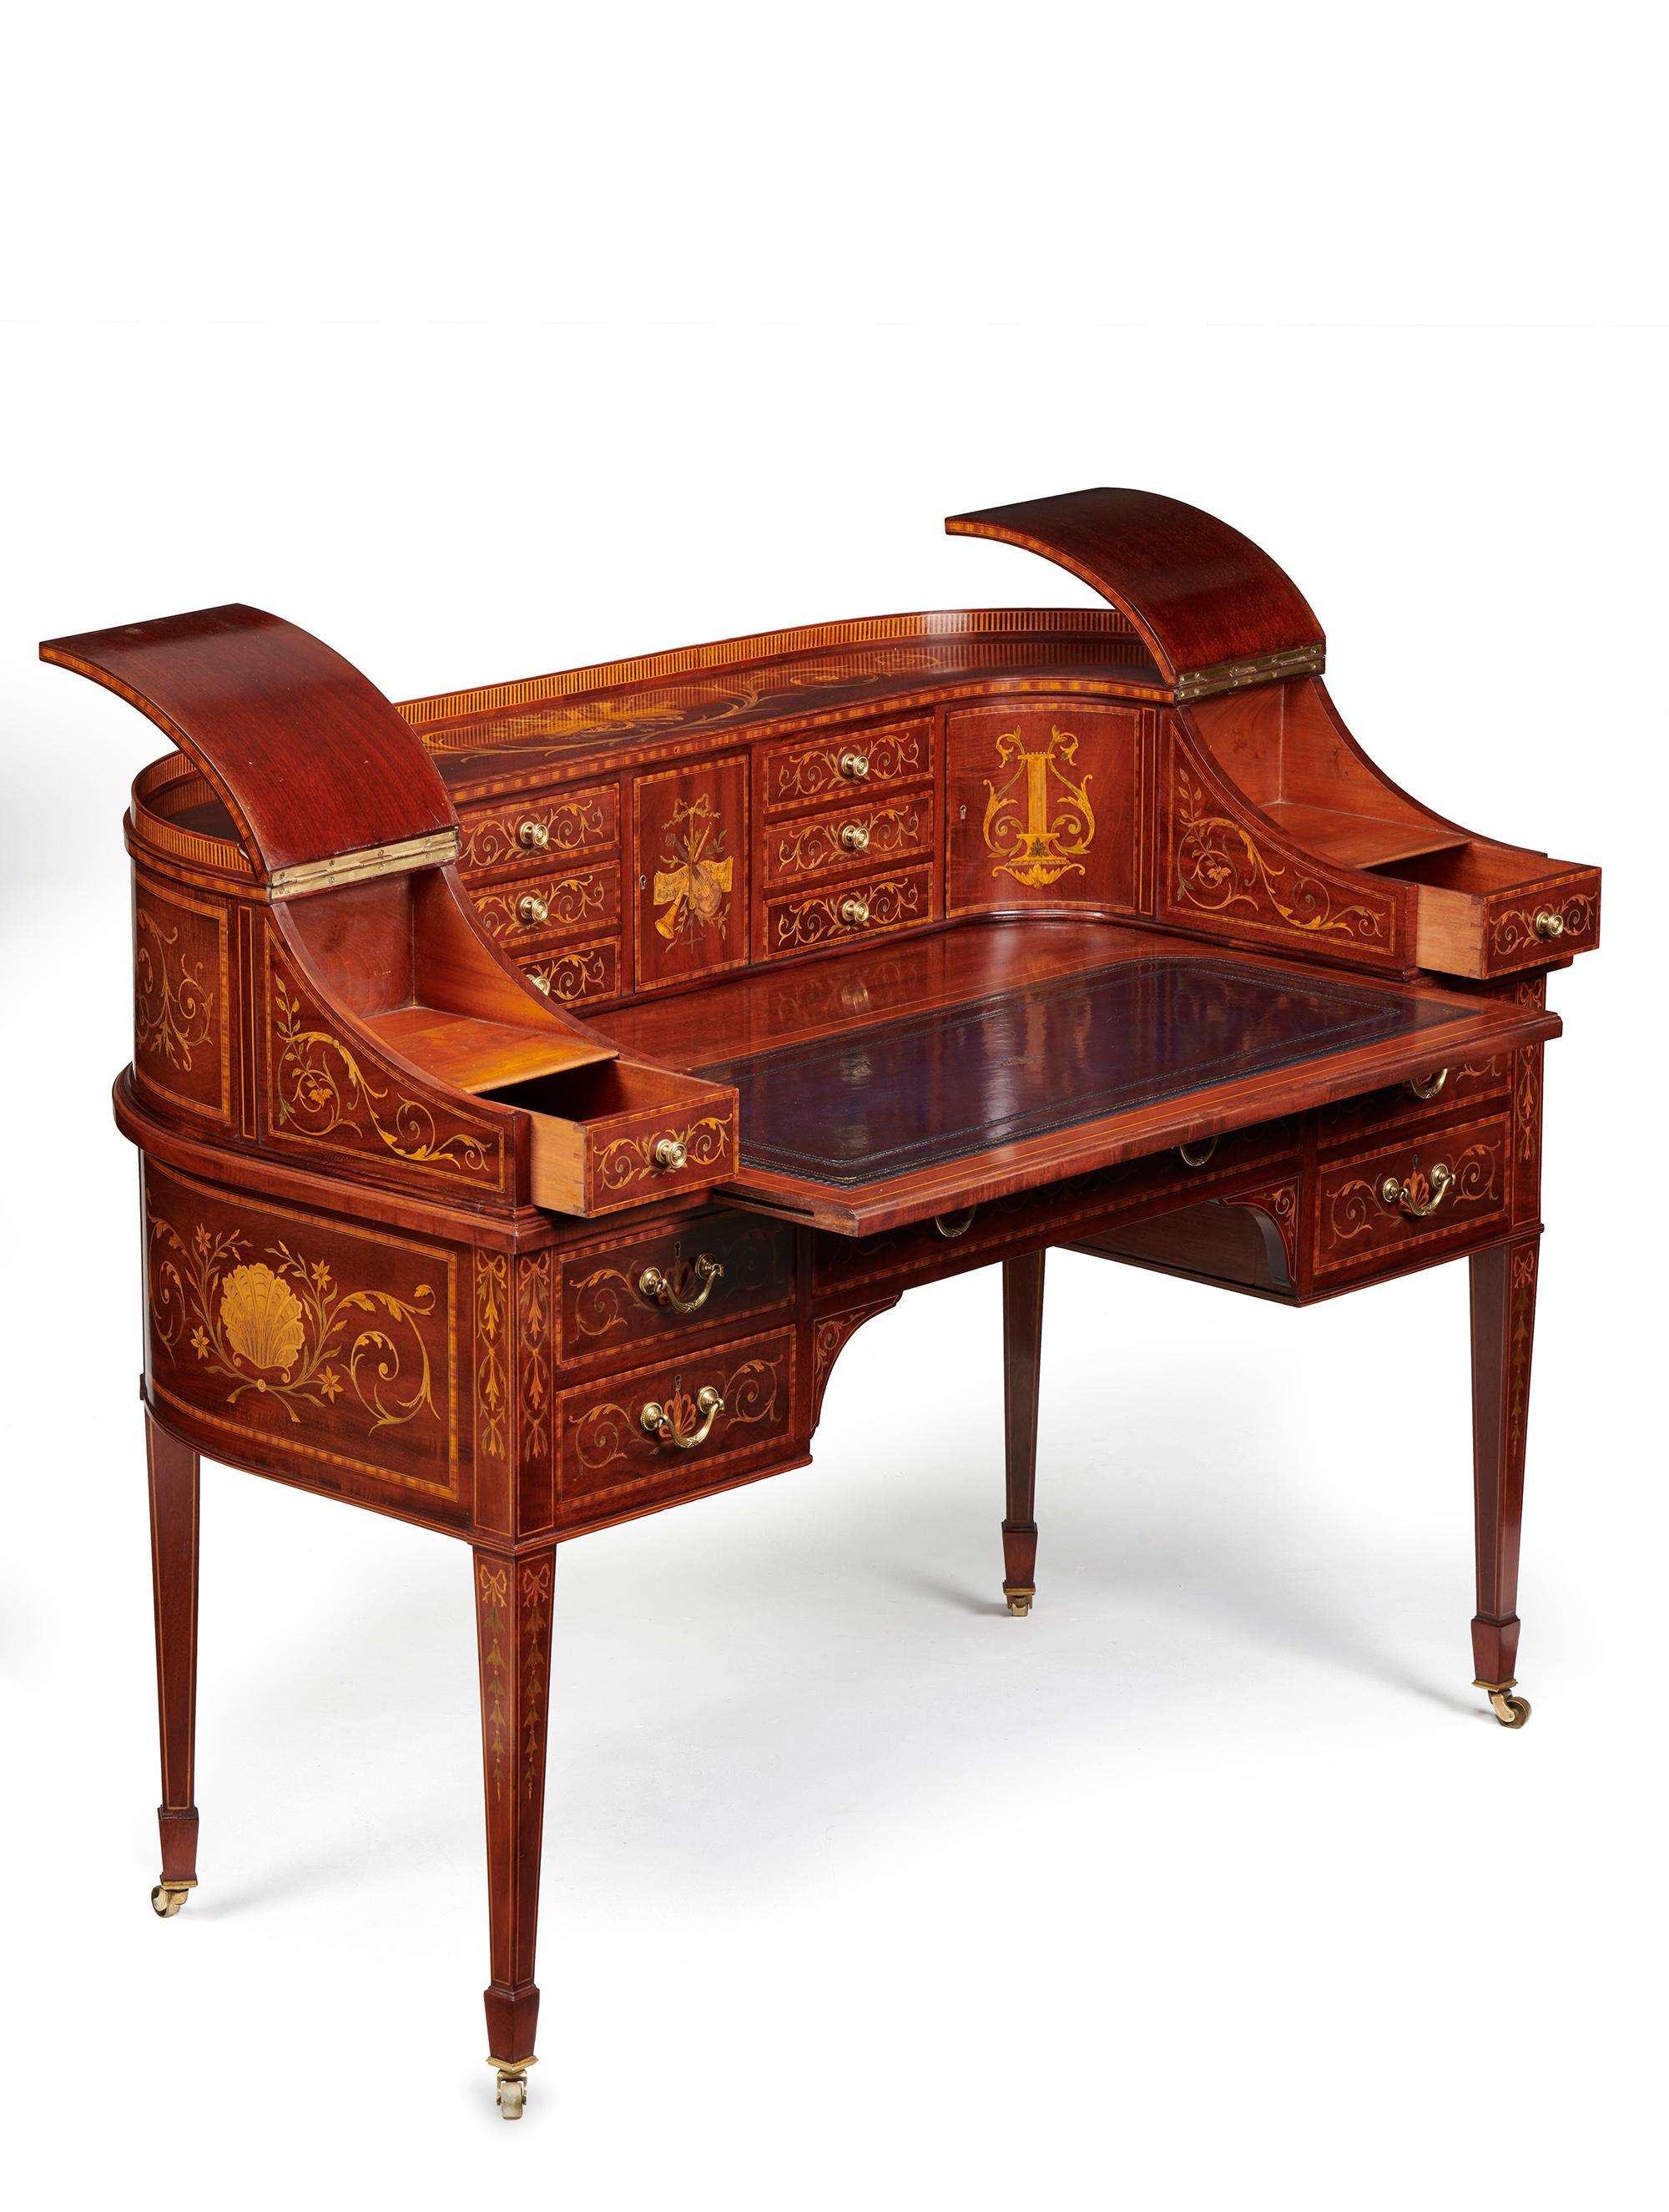 19th Century Maple & Co. Mahogany Satinwood and Marquetry Inlaid Victorian Carlton House Desk